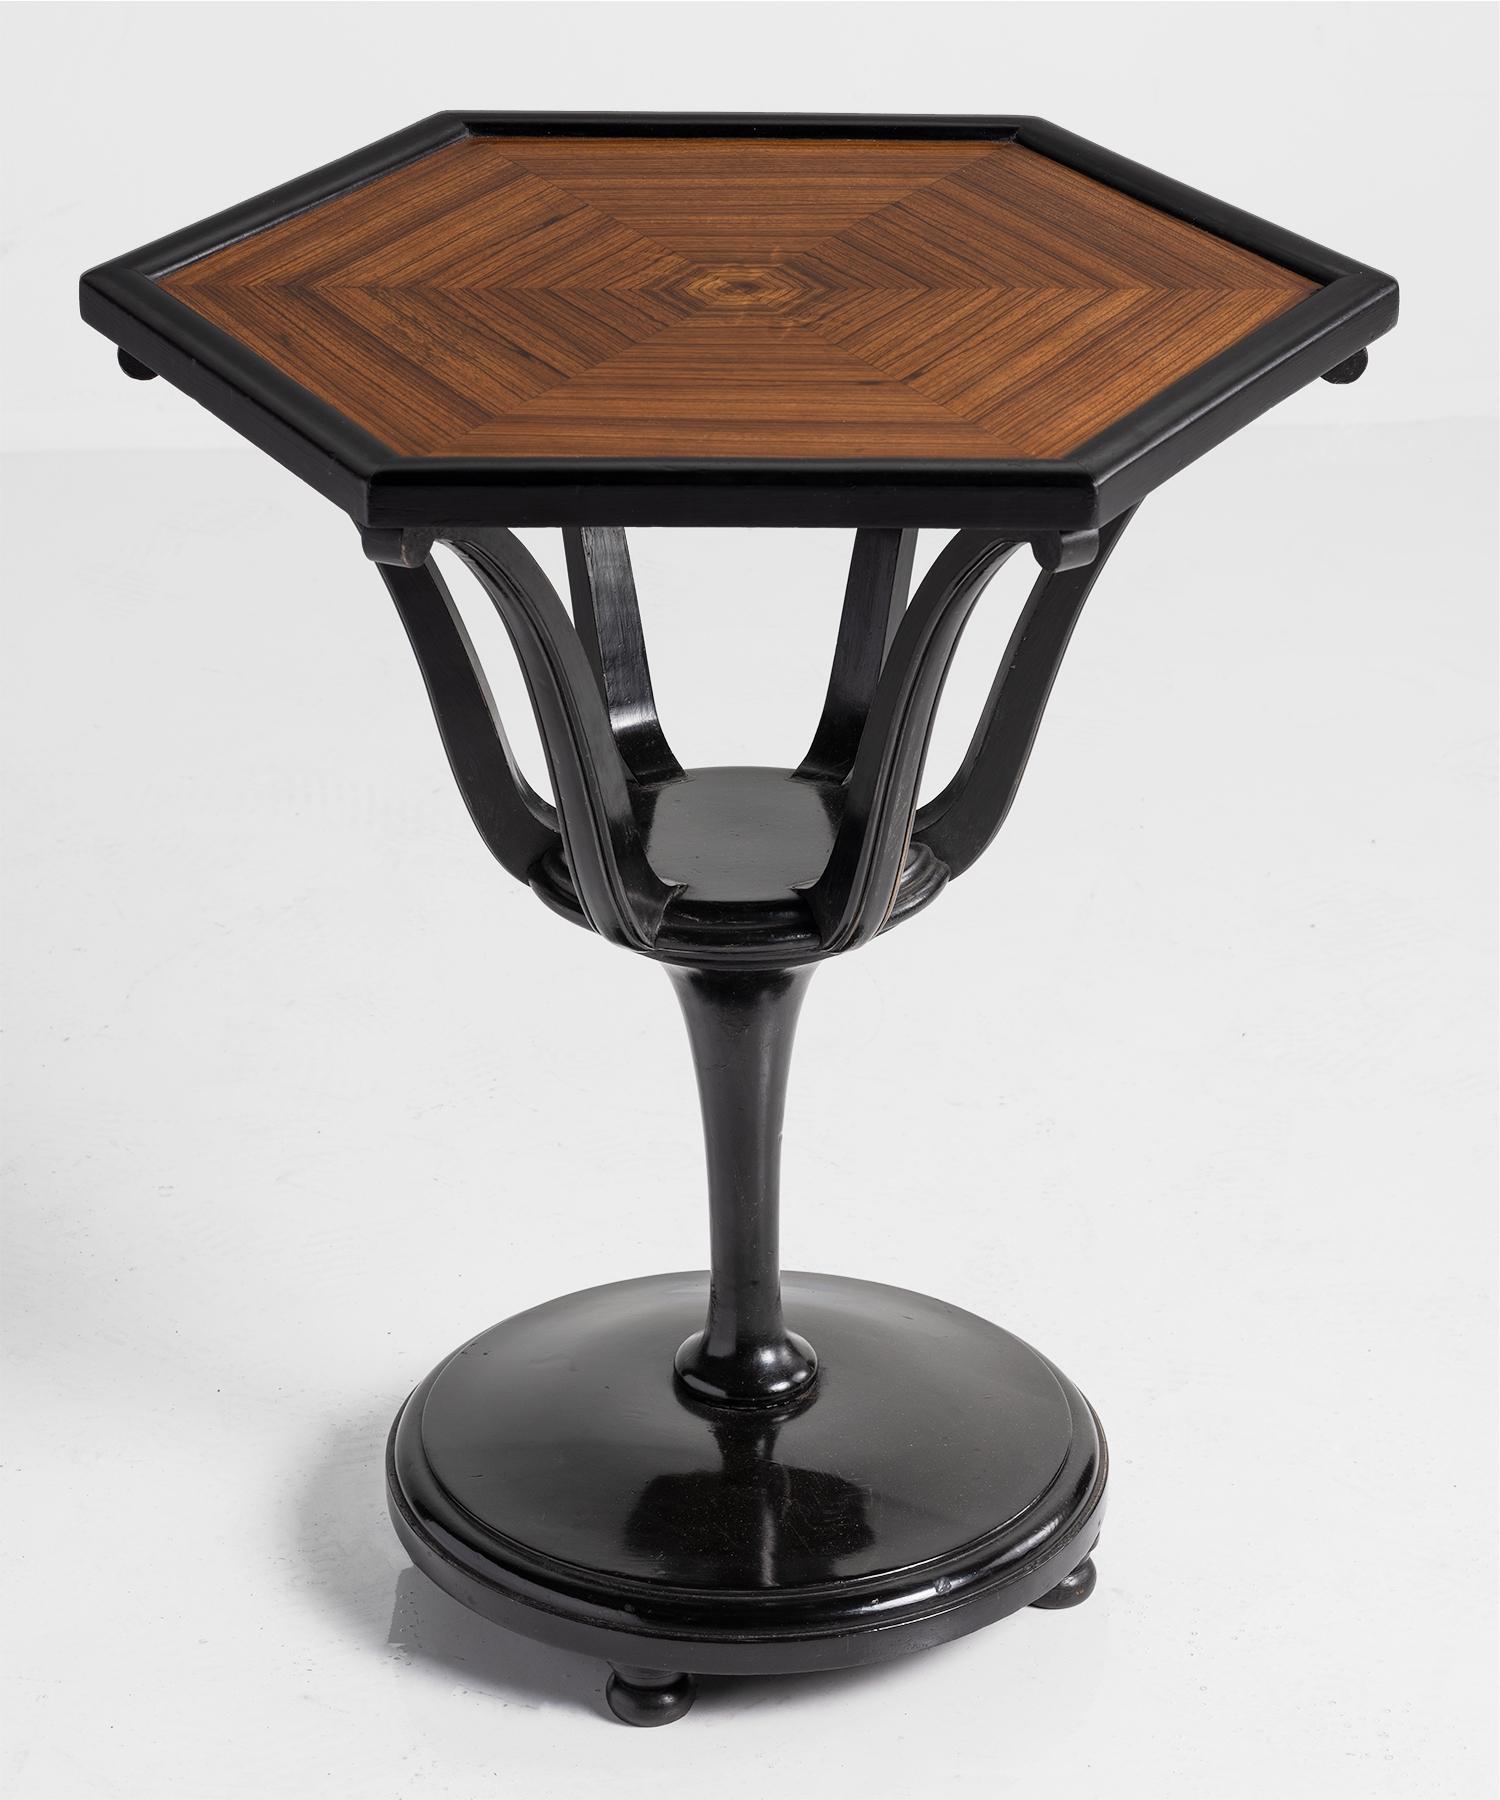 Hexagonal ebonized table, England, 20th century.

Art Deco occasional table with unique form.